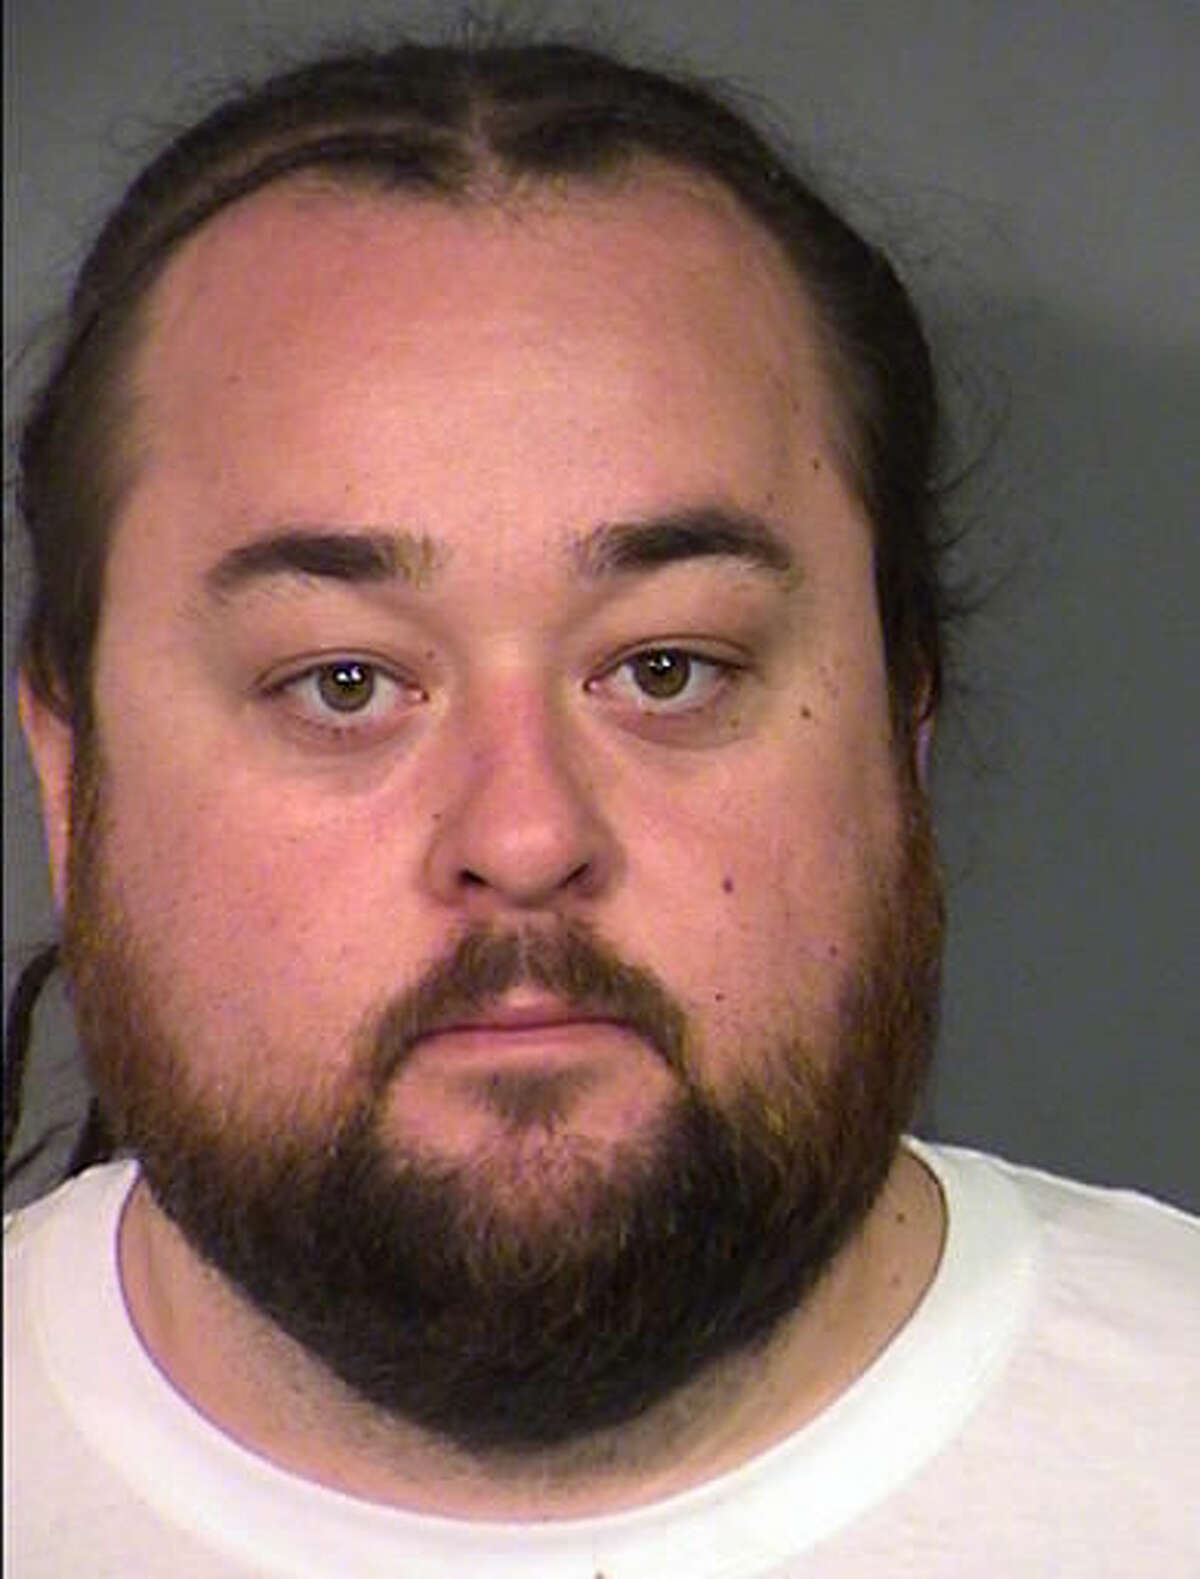 This Clark County Detention Center photo, provided by the Las Vegas Metropolitan Police Department, shows Austin Lee Russell, 33, of Las Vegas, on Wednesday, March 9, 2016. Russell is known as Chumlee to viewers of the reality cable TV show "Pawn Stars." Russell was being held in a Las Vegas jail late Wednesday, following his arrest on weapon and multiple drug charges, after officers serving a warrant at his home in a sexual assault investigation found methamphetamine, marijuana and at least one gun. (Las Vegas Metropolitan Police Department via AP)